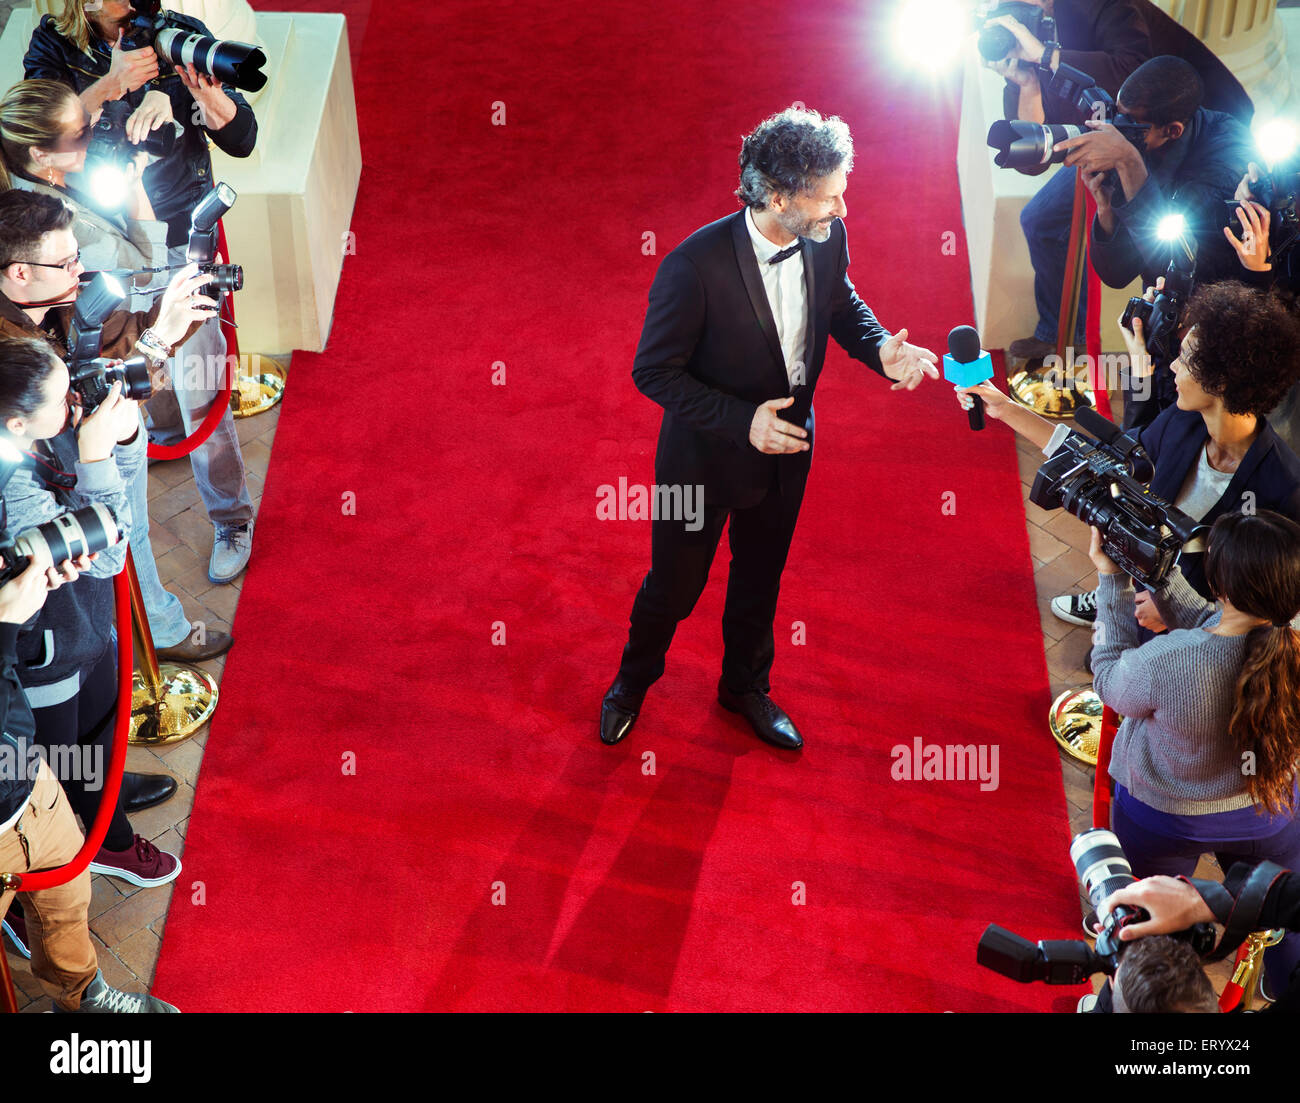 Celebrity on red carpet being interviewed and photographed by paparazzi Stock Photo